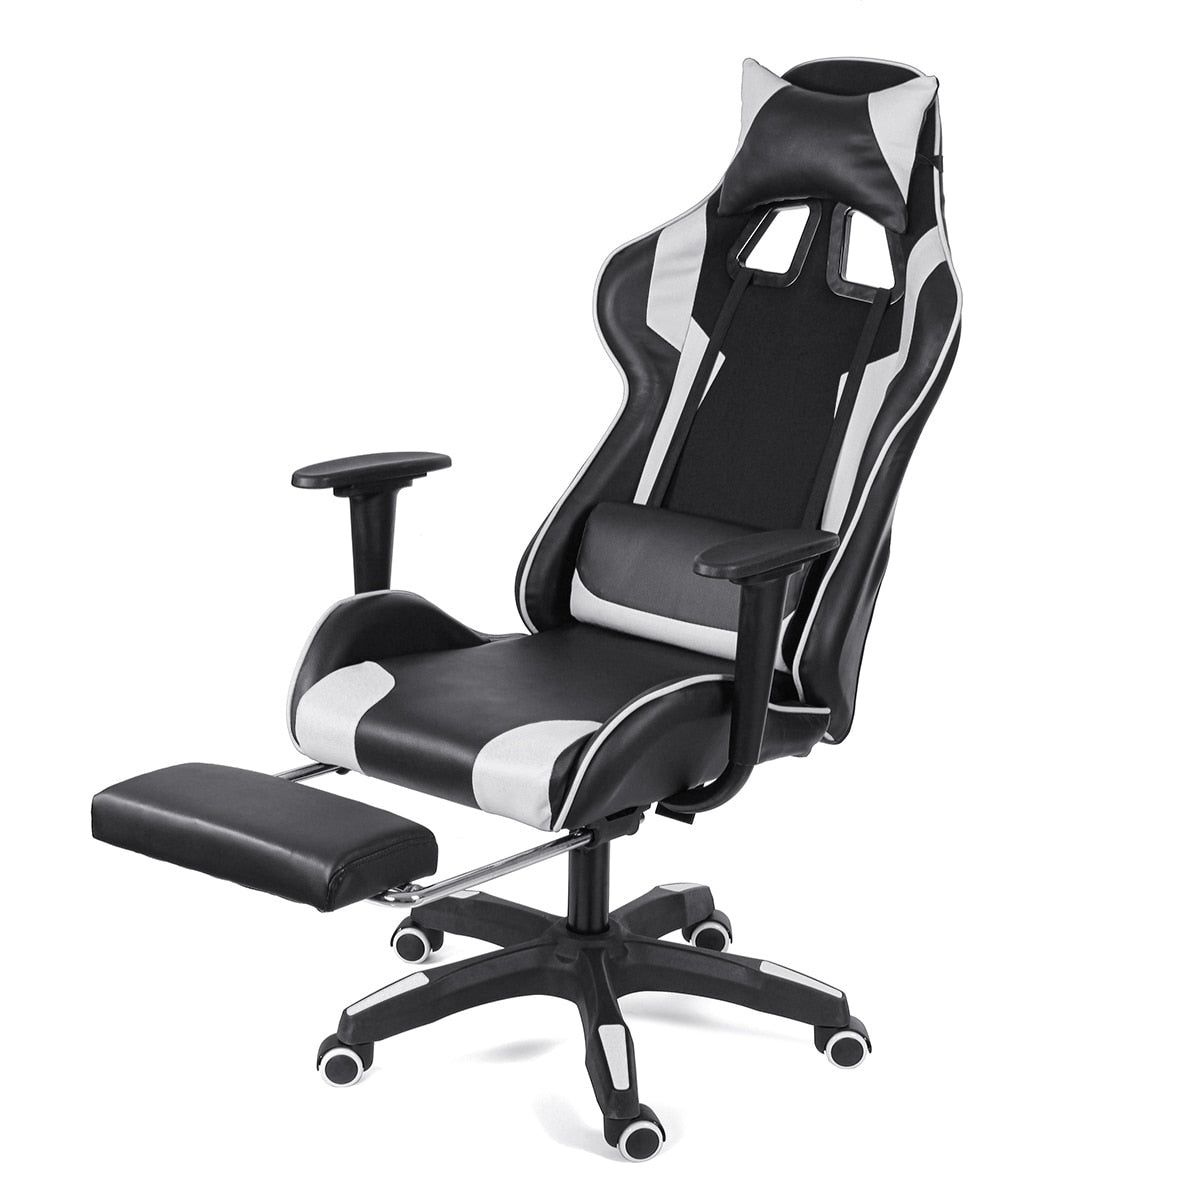 Pro Gaming Chair